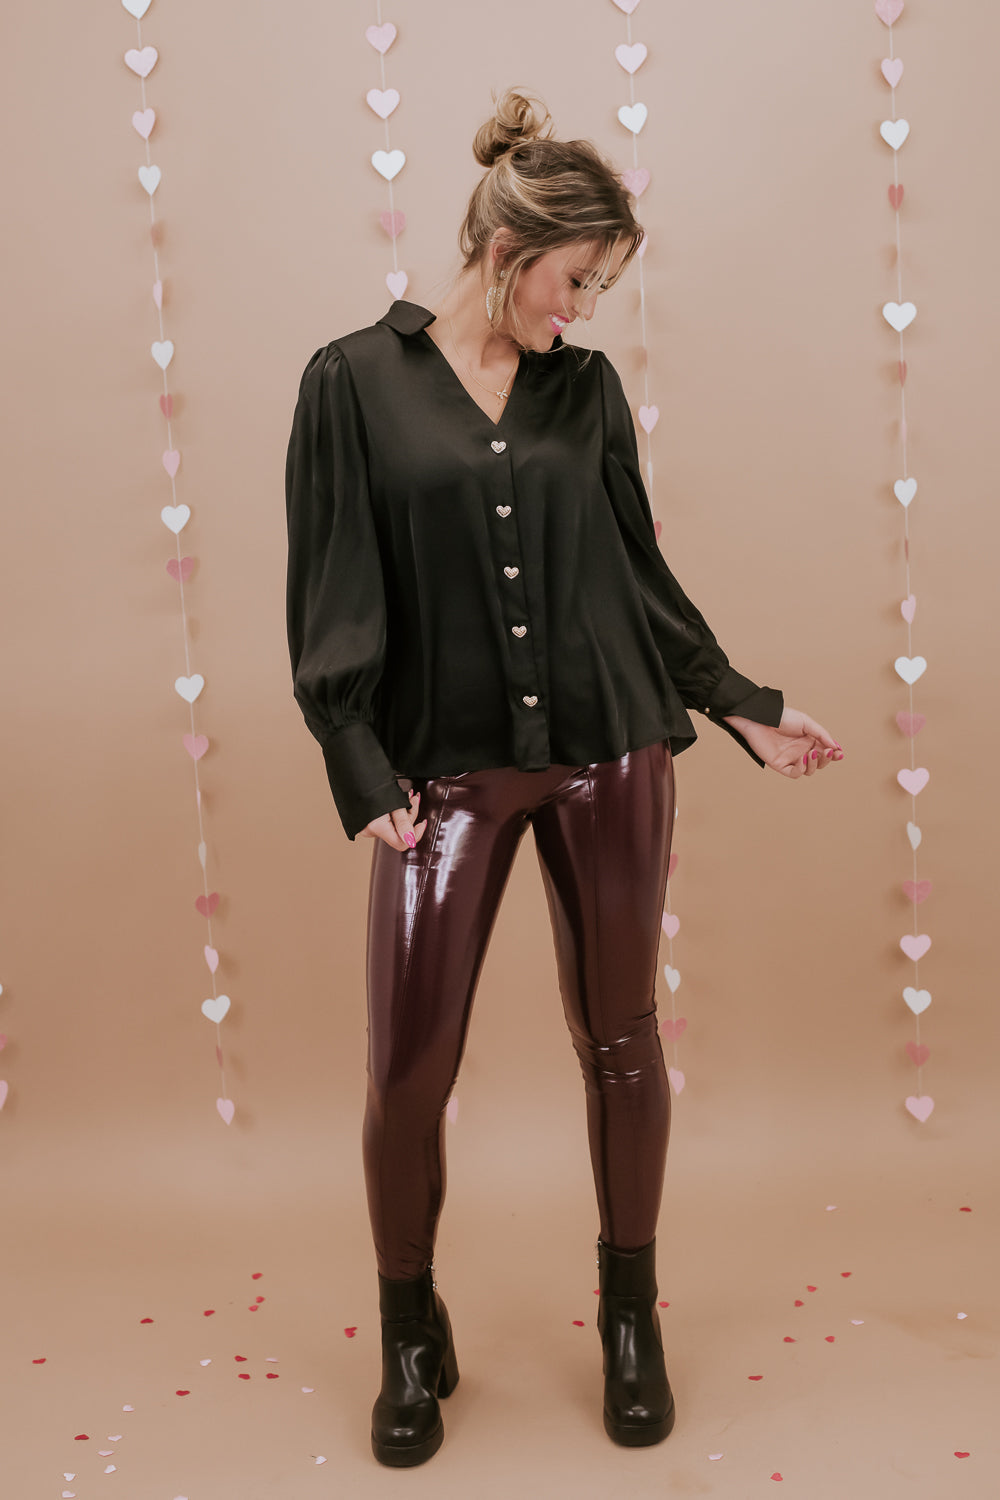 Spanx Faux Patent Leather Leggings Ruby Red Burgundy Medium New